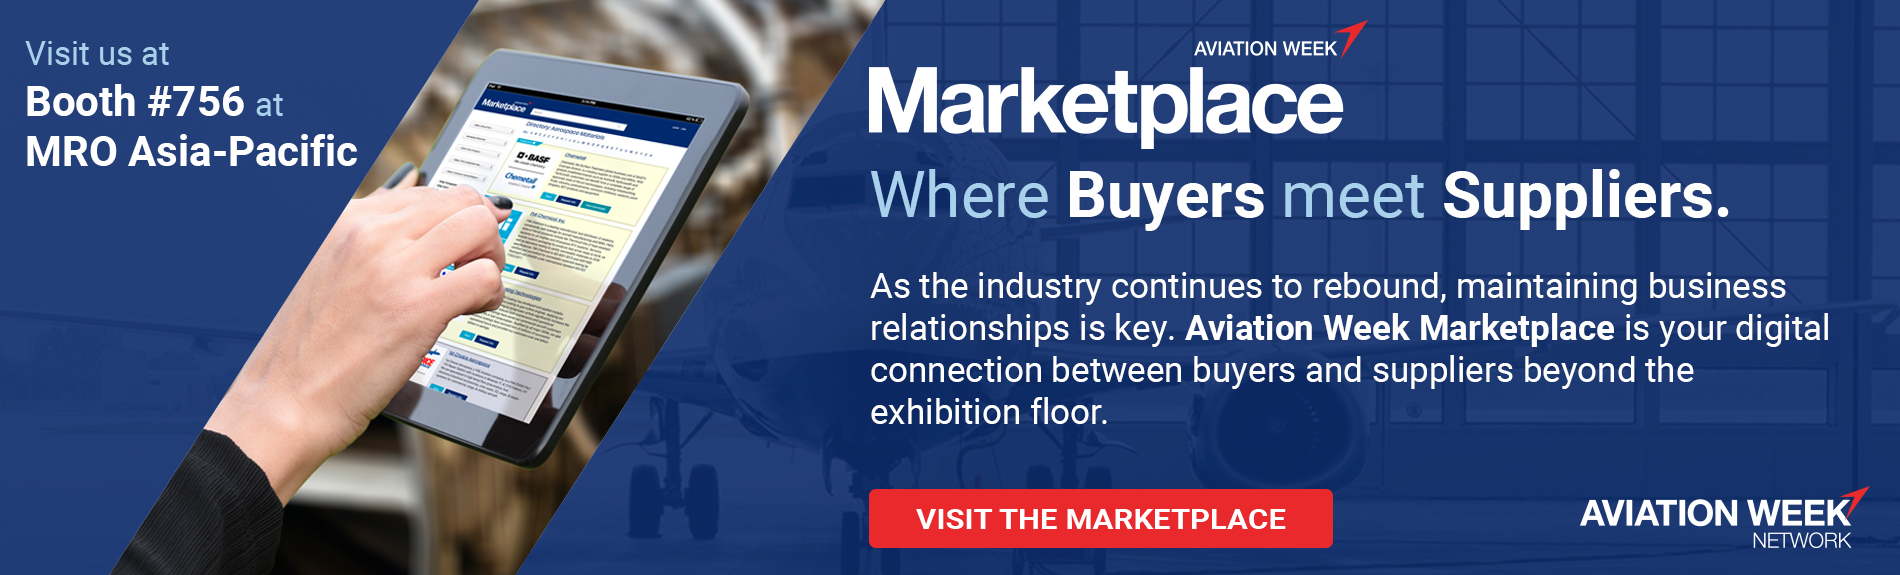 Visit AW Marketplace: Booth 756 at MRO Asia-Pacific